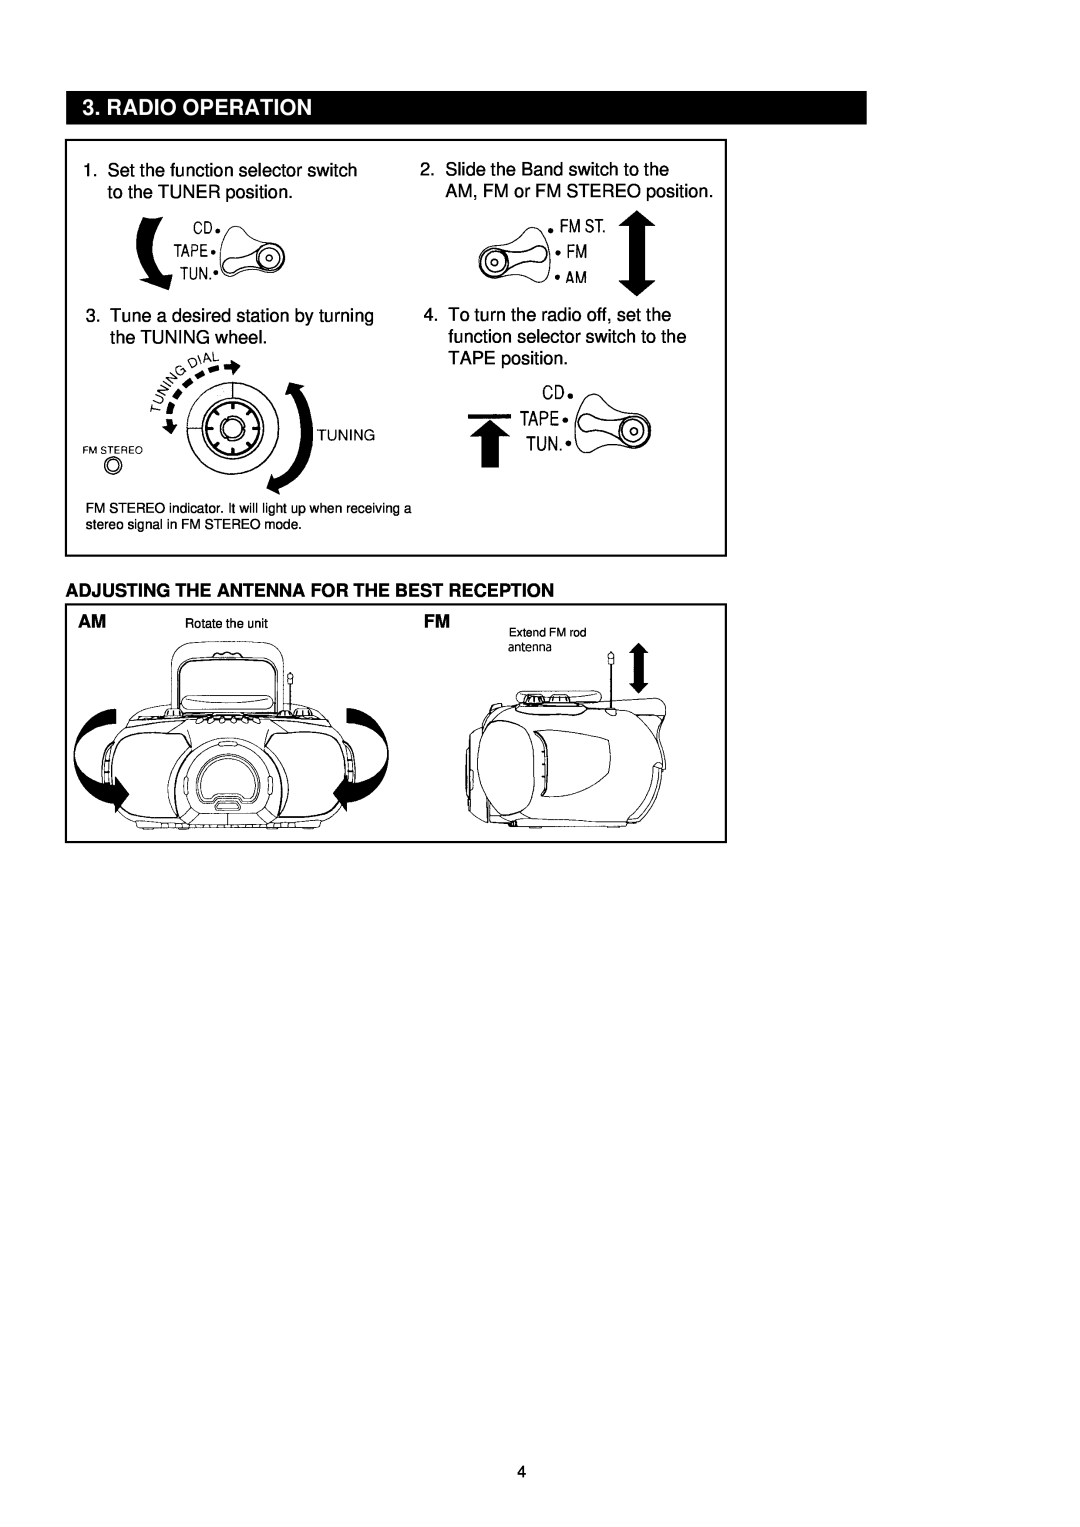 Palsonic PRC-510 instruction manual Radio Operation, Adjusting The Antenna For The Best Reception 